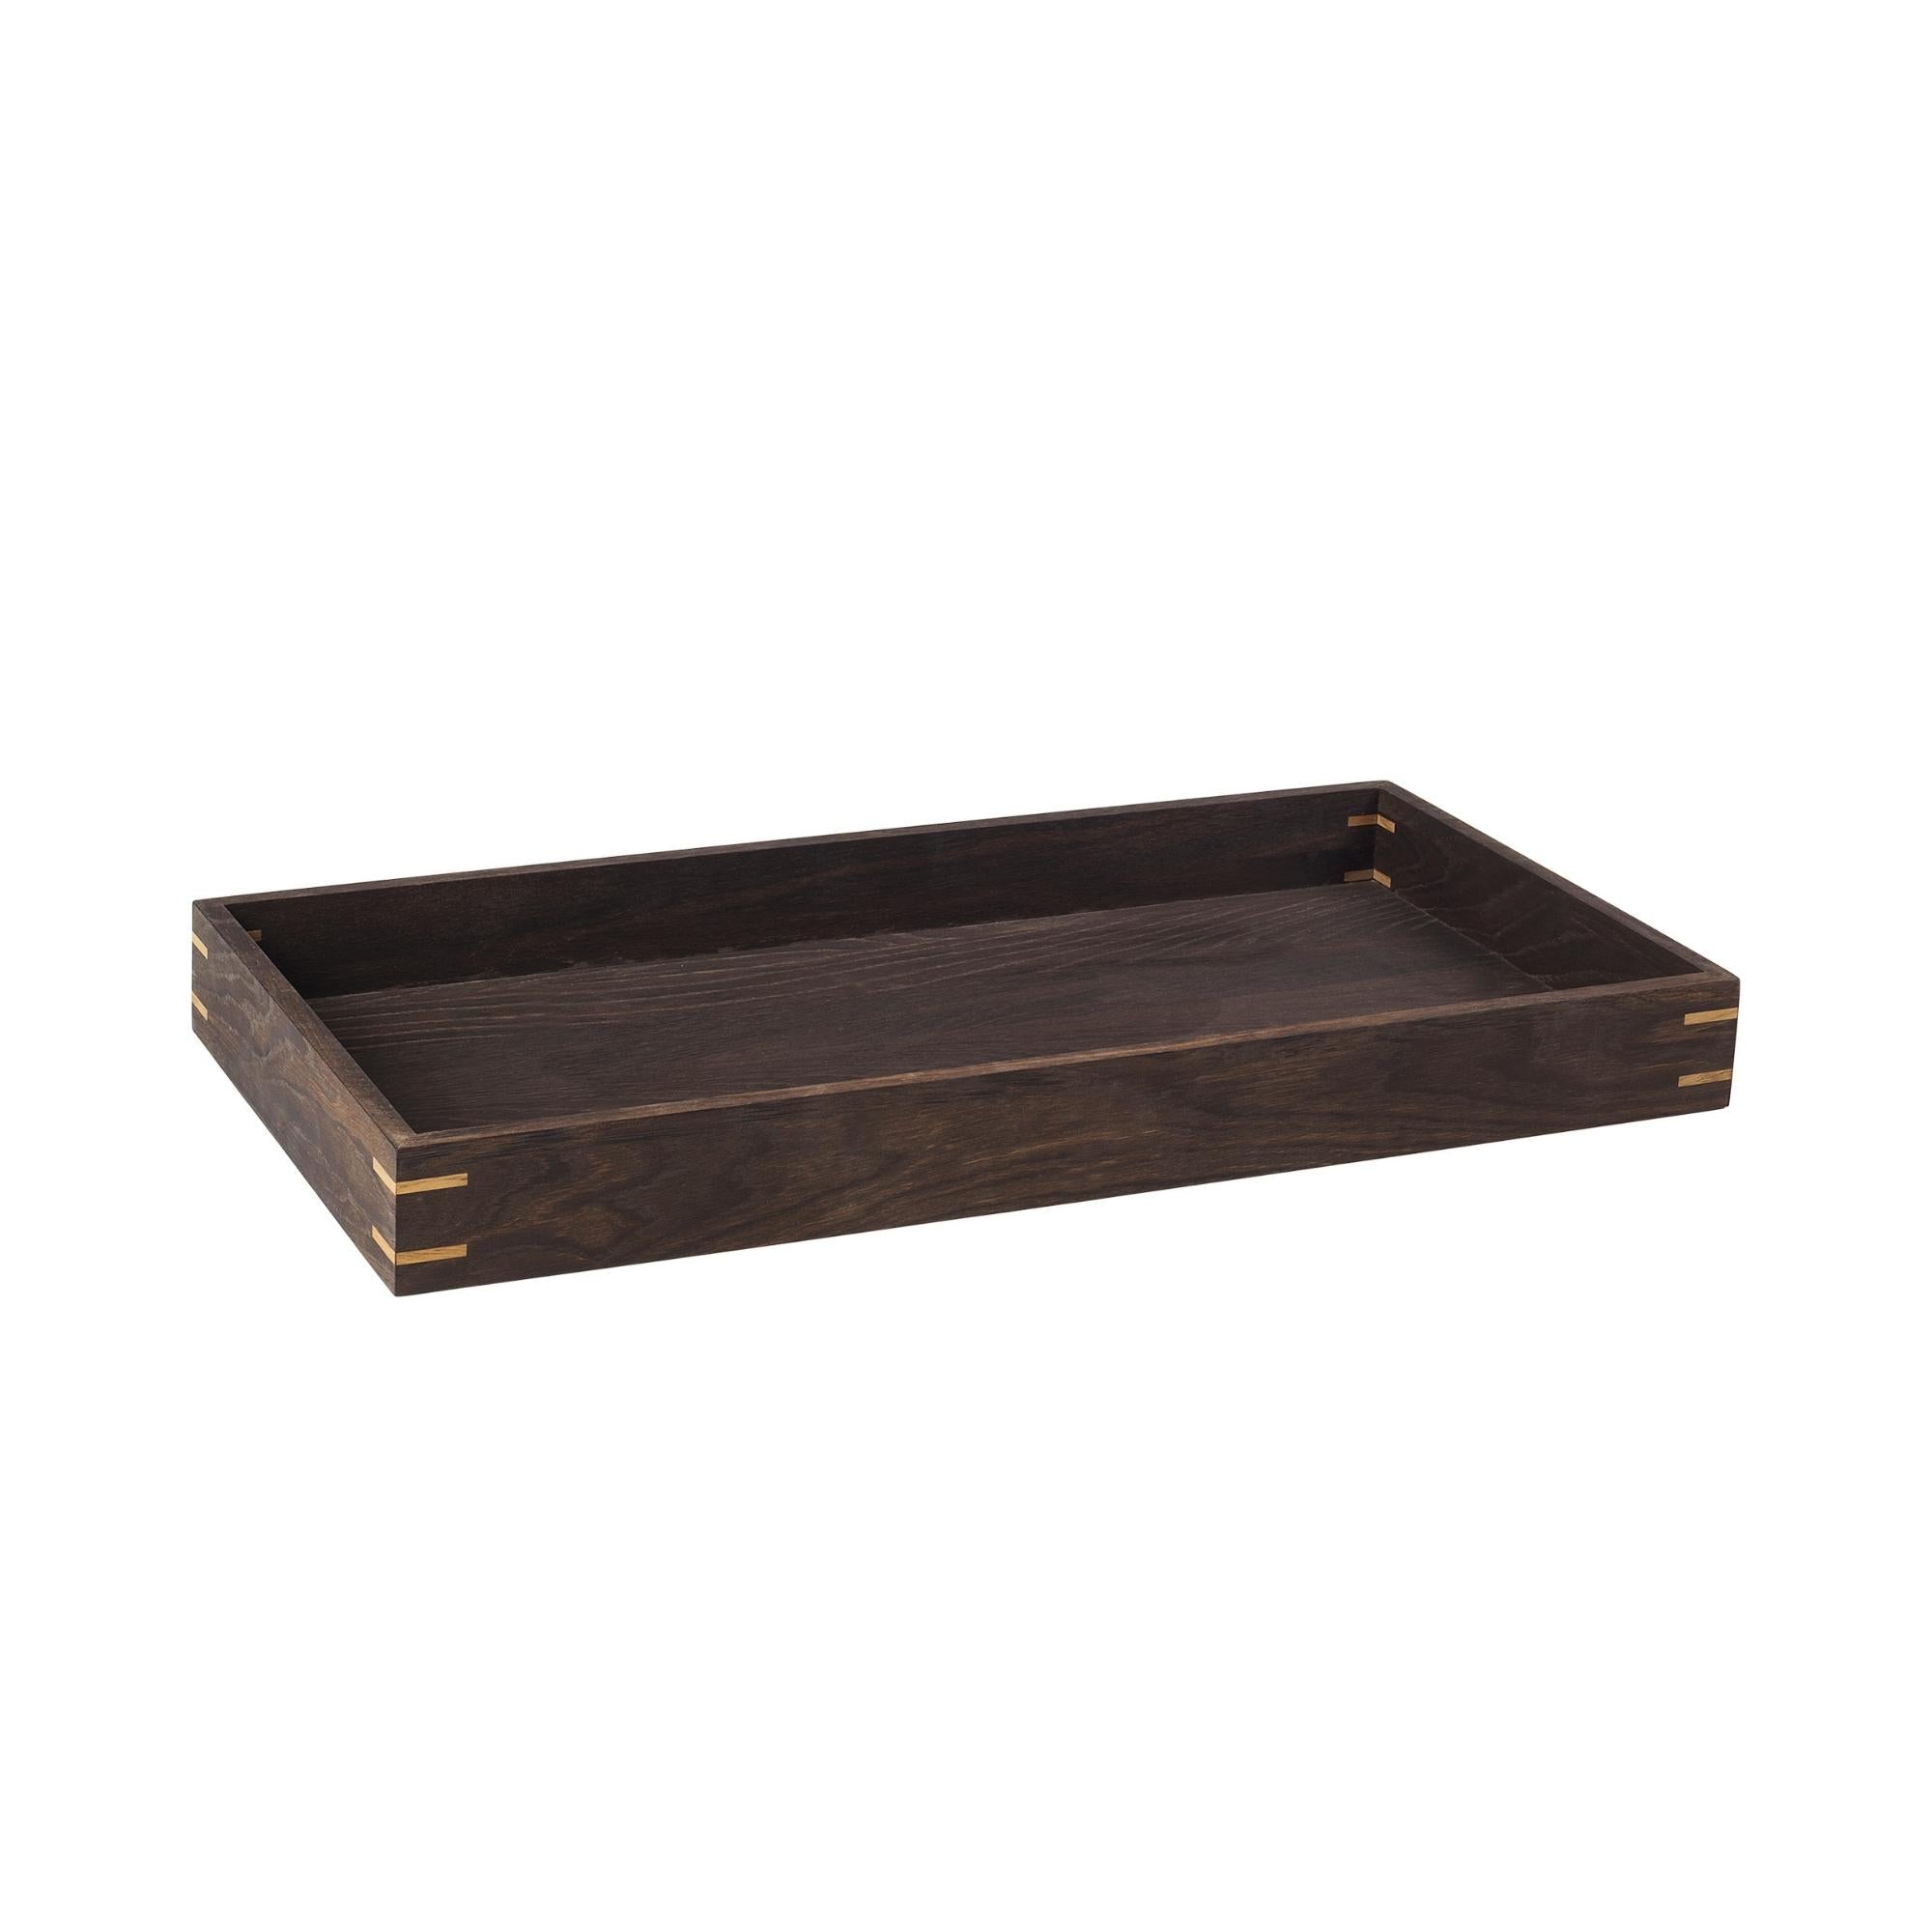 Japanese Tray - L - THAT COOL LIVING